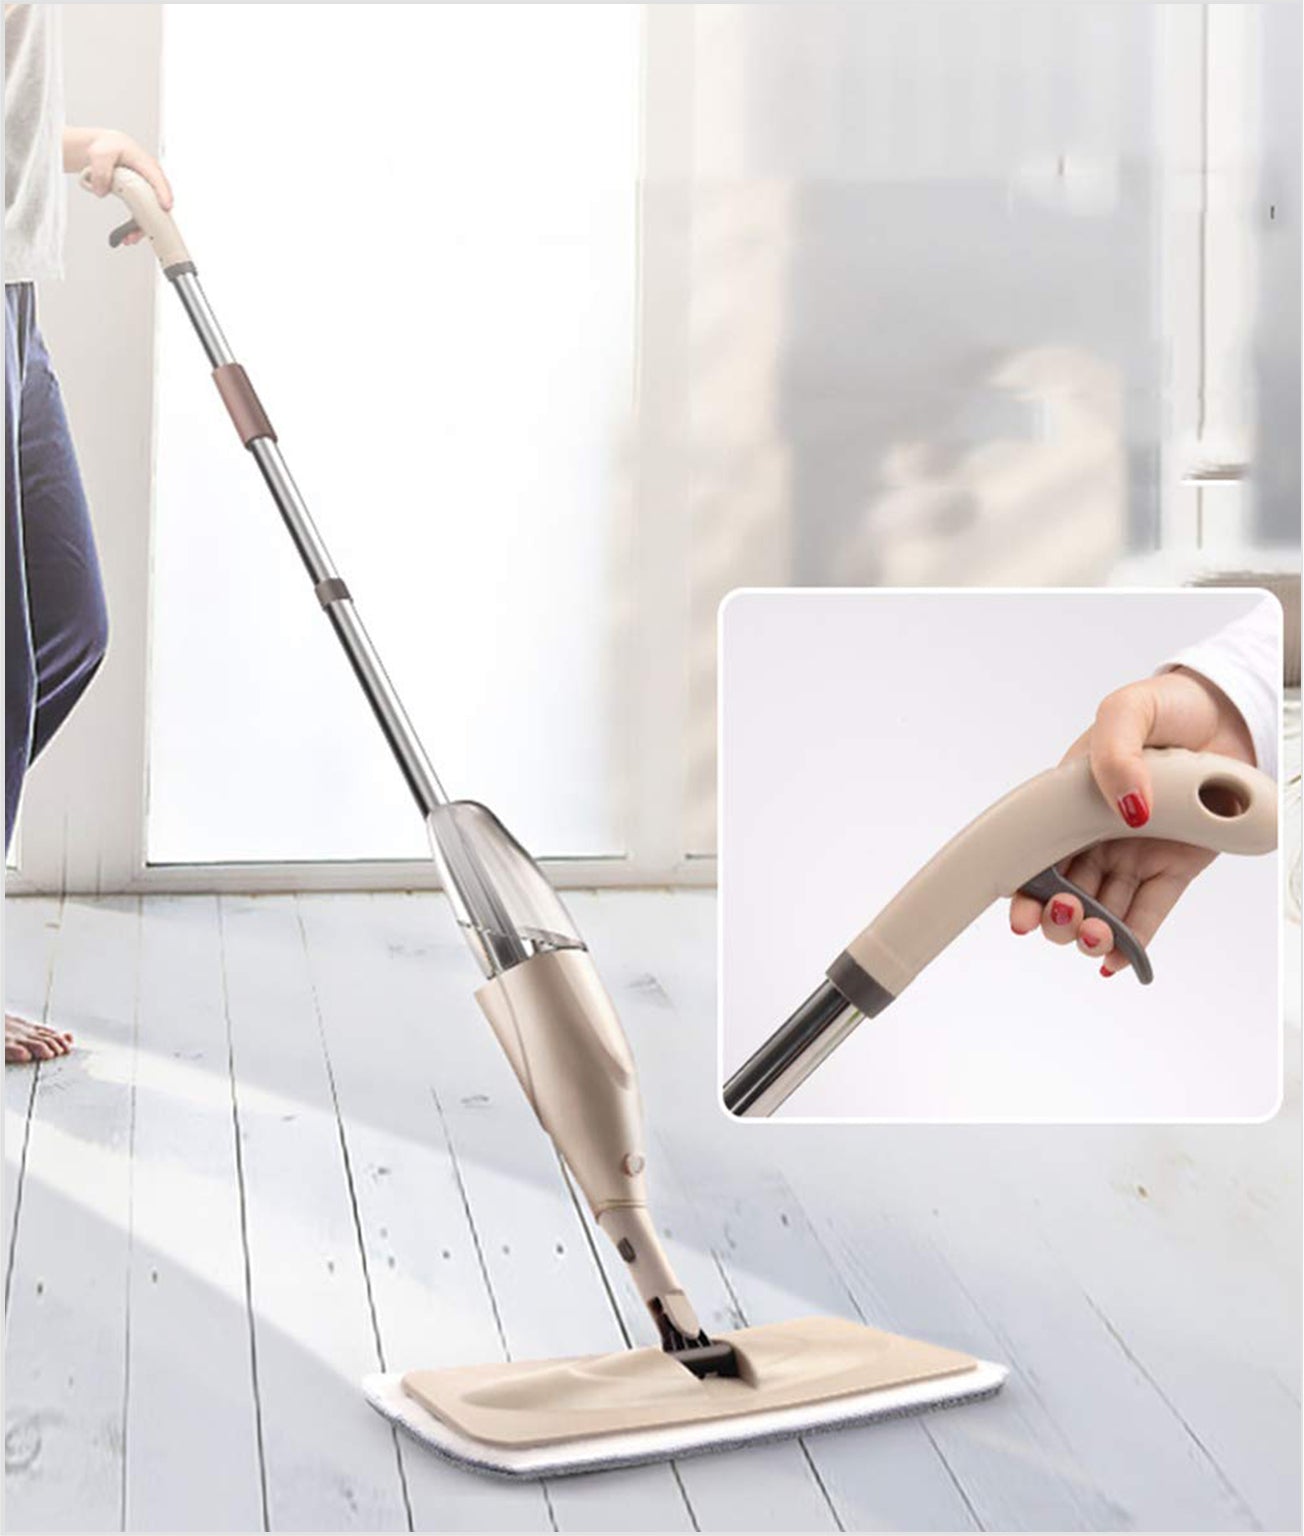 360 Rotatable Spray Mop with Refillable Spray Bottle & Microfiber Pads